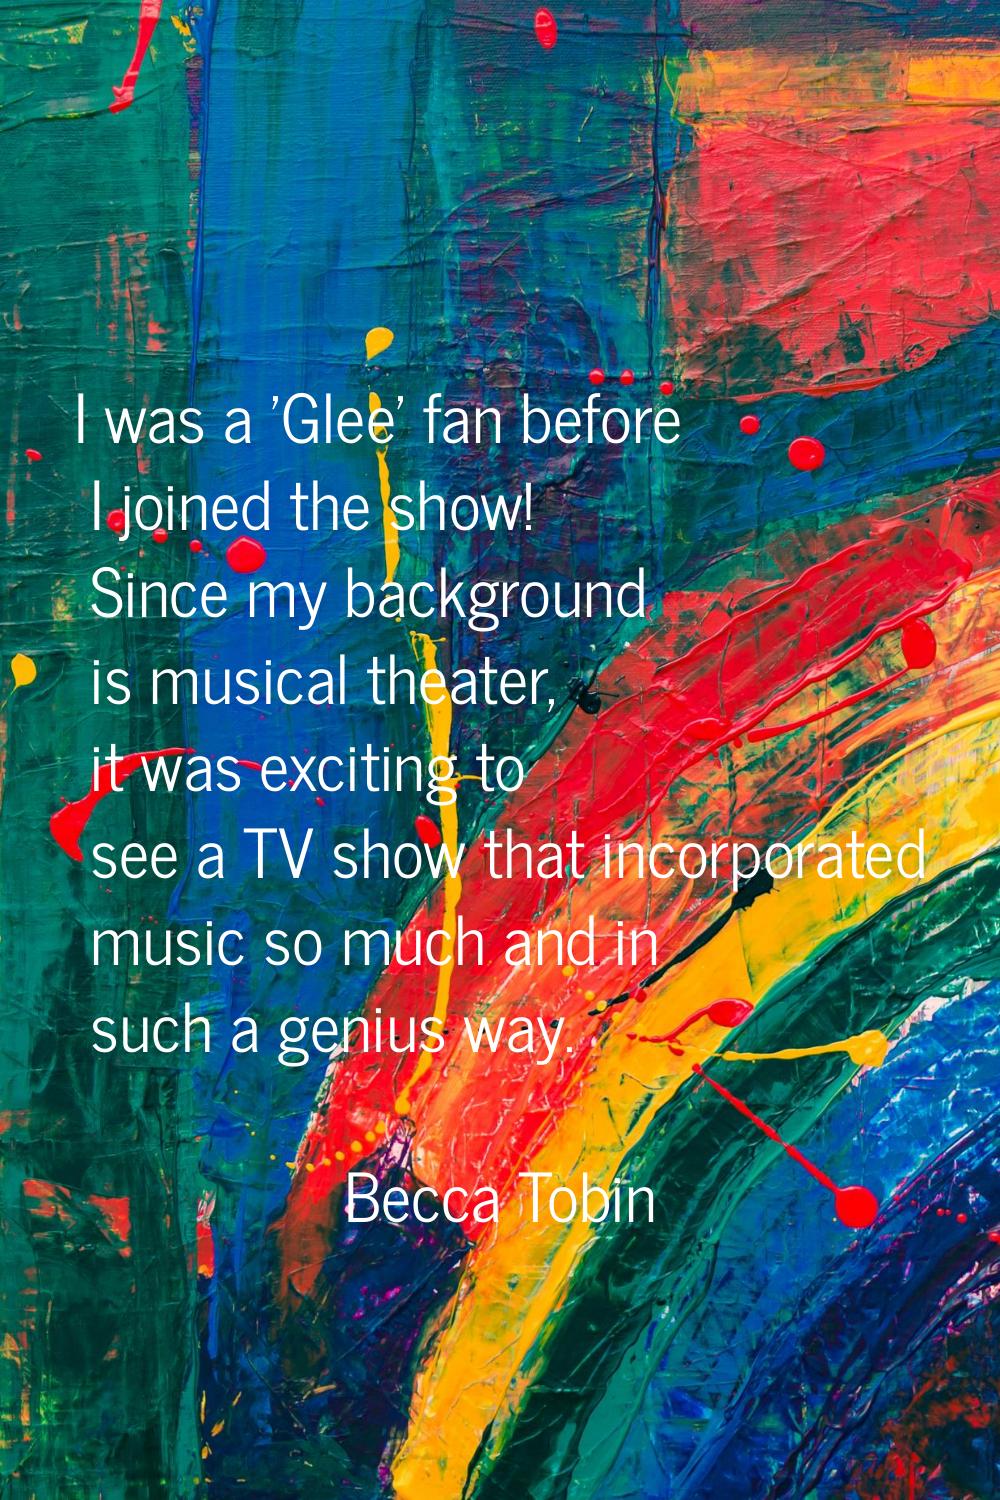 I was a 'Glee' fan before I joined the show! Since my background is musical theater, it was excitin